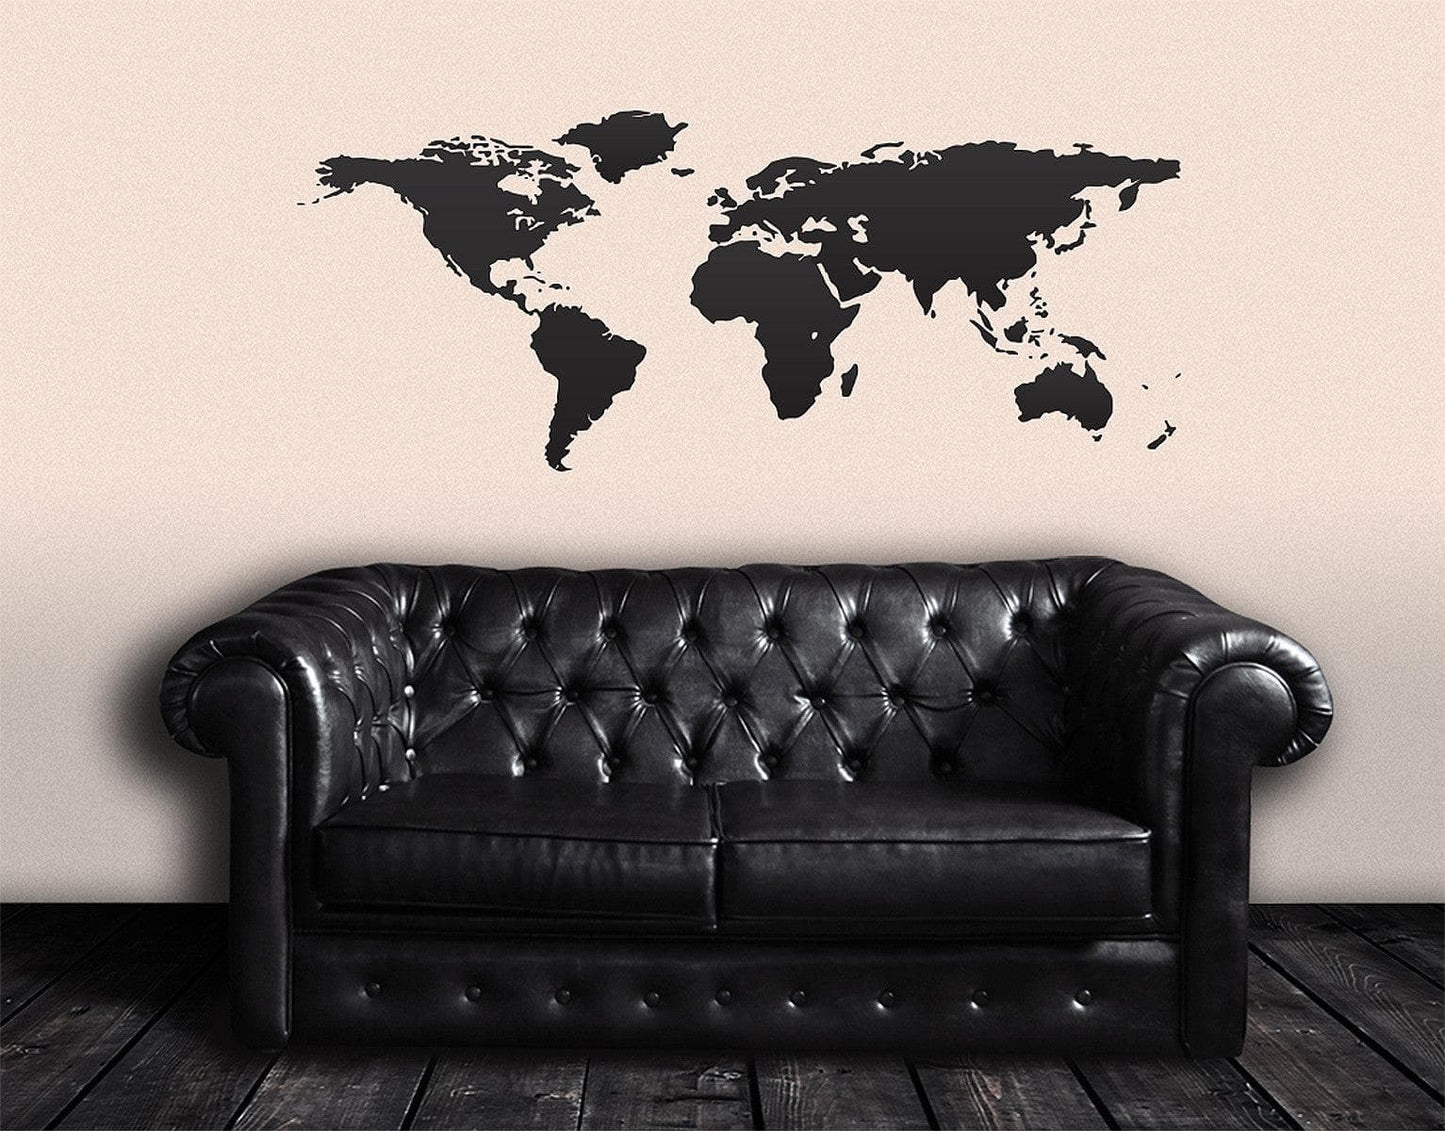 Black world map decal on a white wall above a black couch.